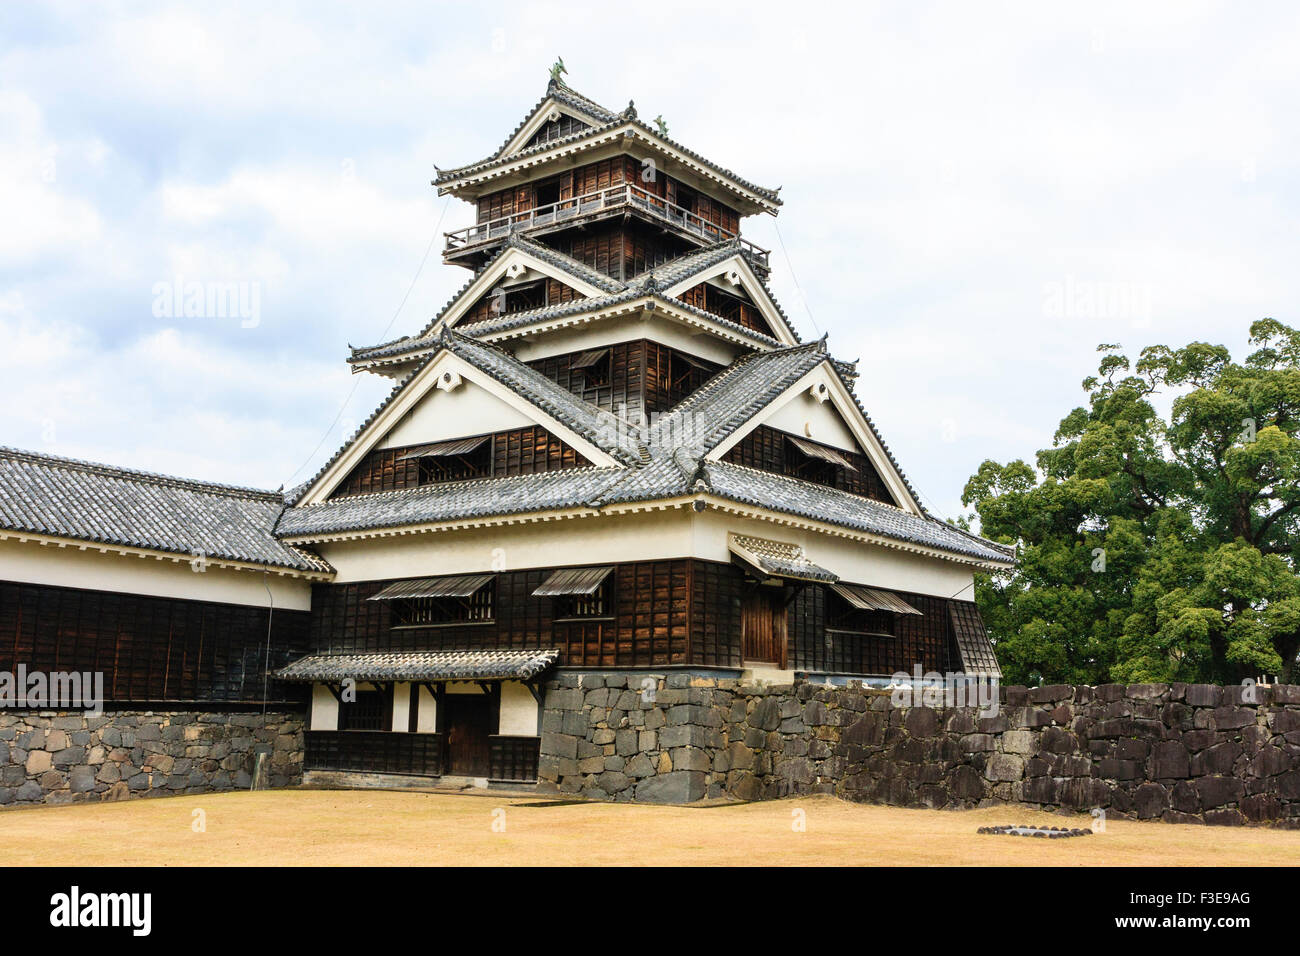 Kumamoto Castle, The multi storey Uto Yagura, turret. With five stories and a basement it is as big as many Japanese castle keeps. Blue sky with cloud. Stock Photo